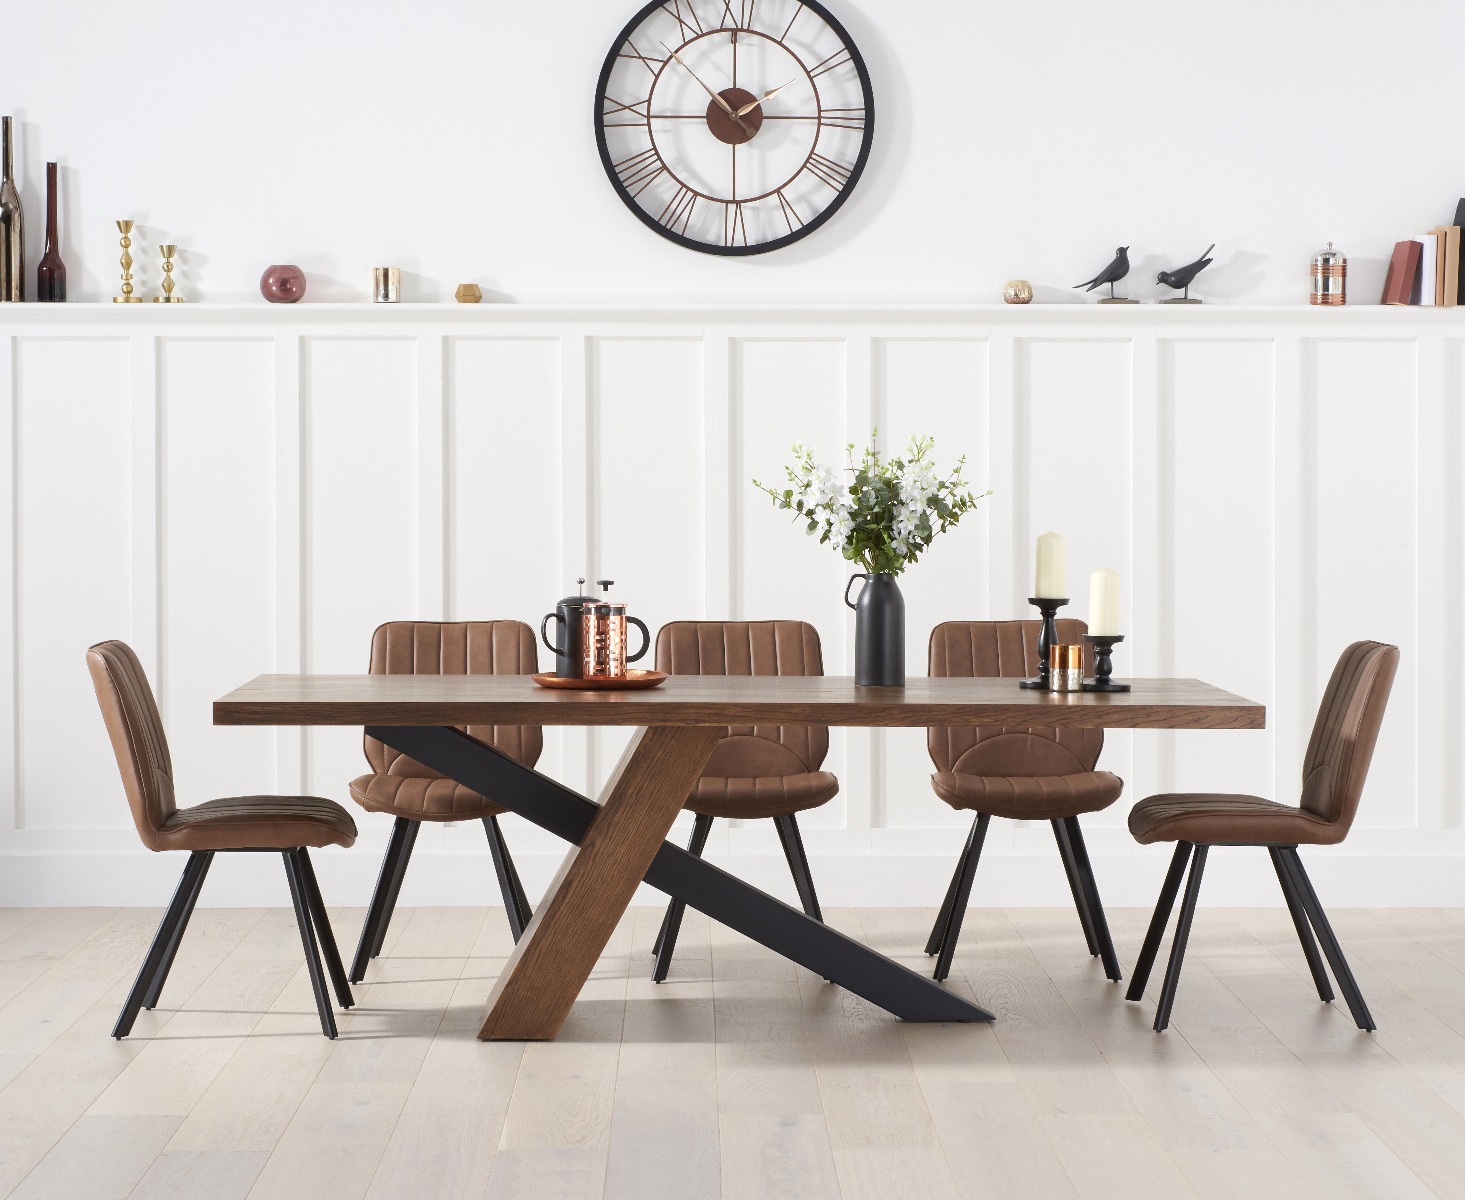 Chateau 180cm Black Leg Industrial Dining Table With 6 Brown Hendrick Faux Leather Dining Chairs